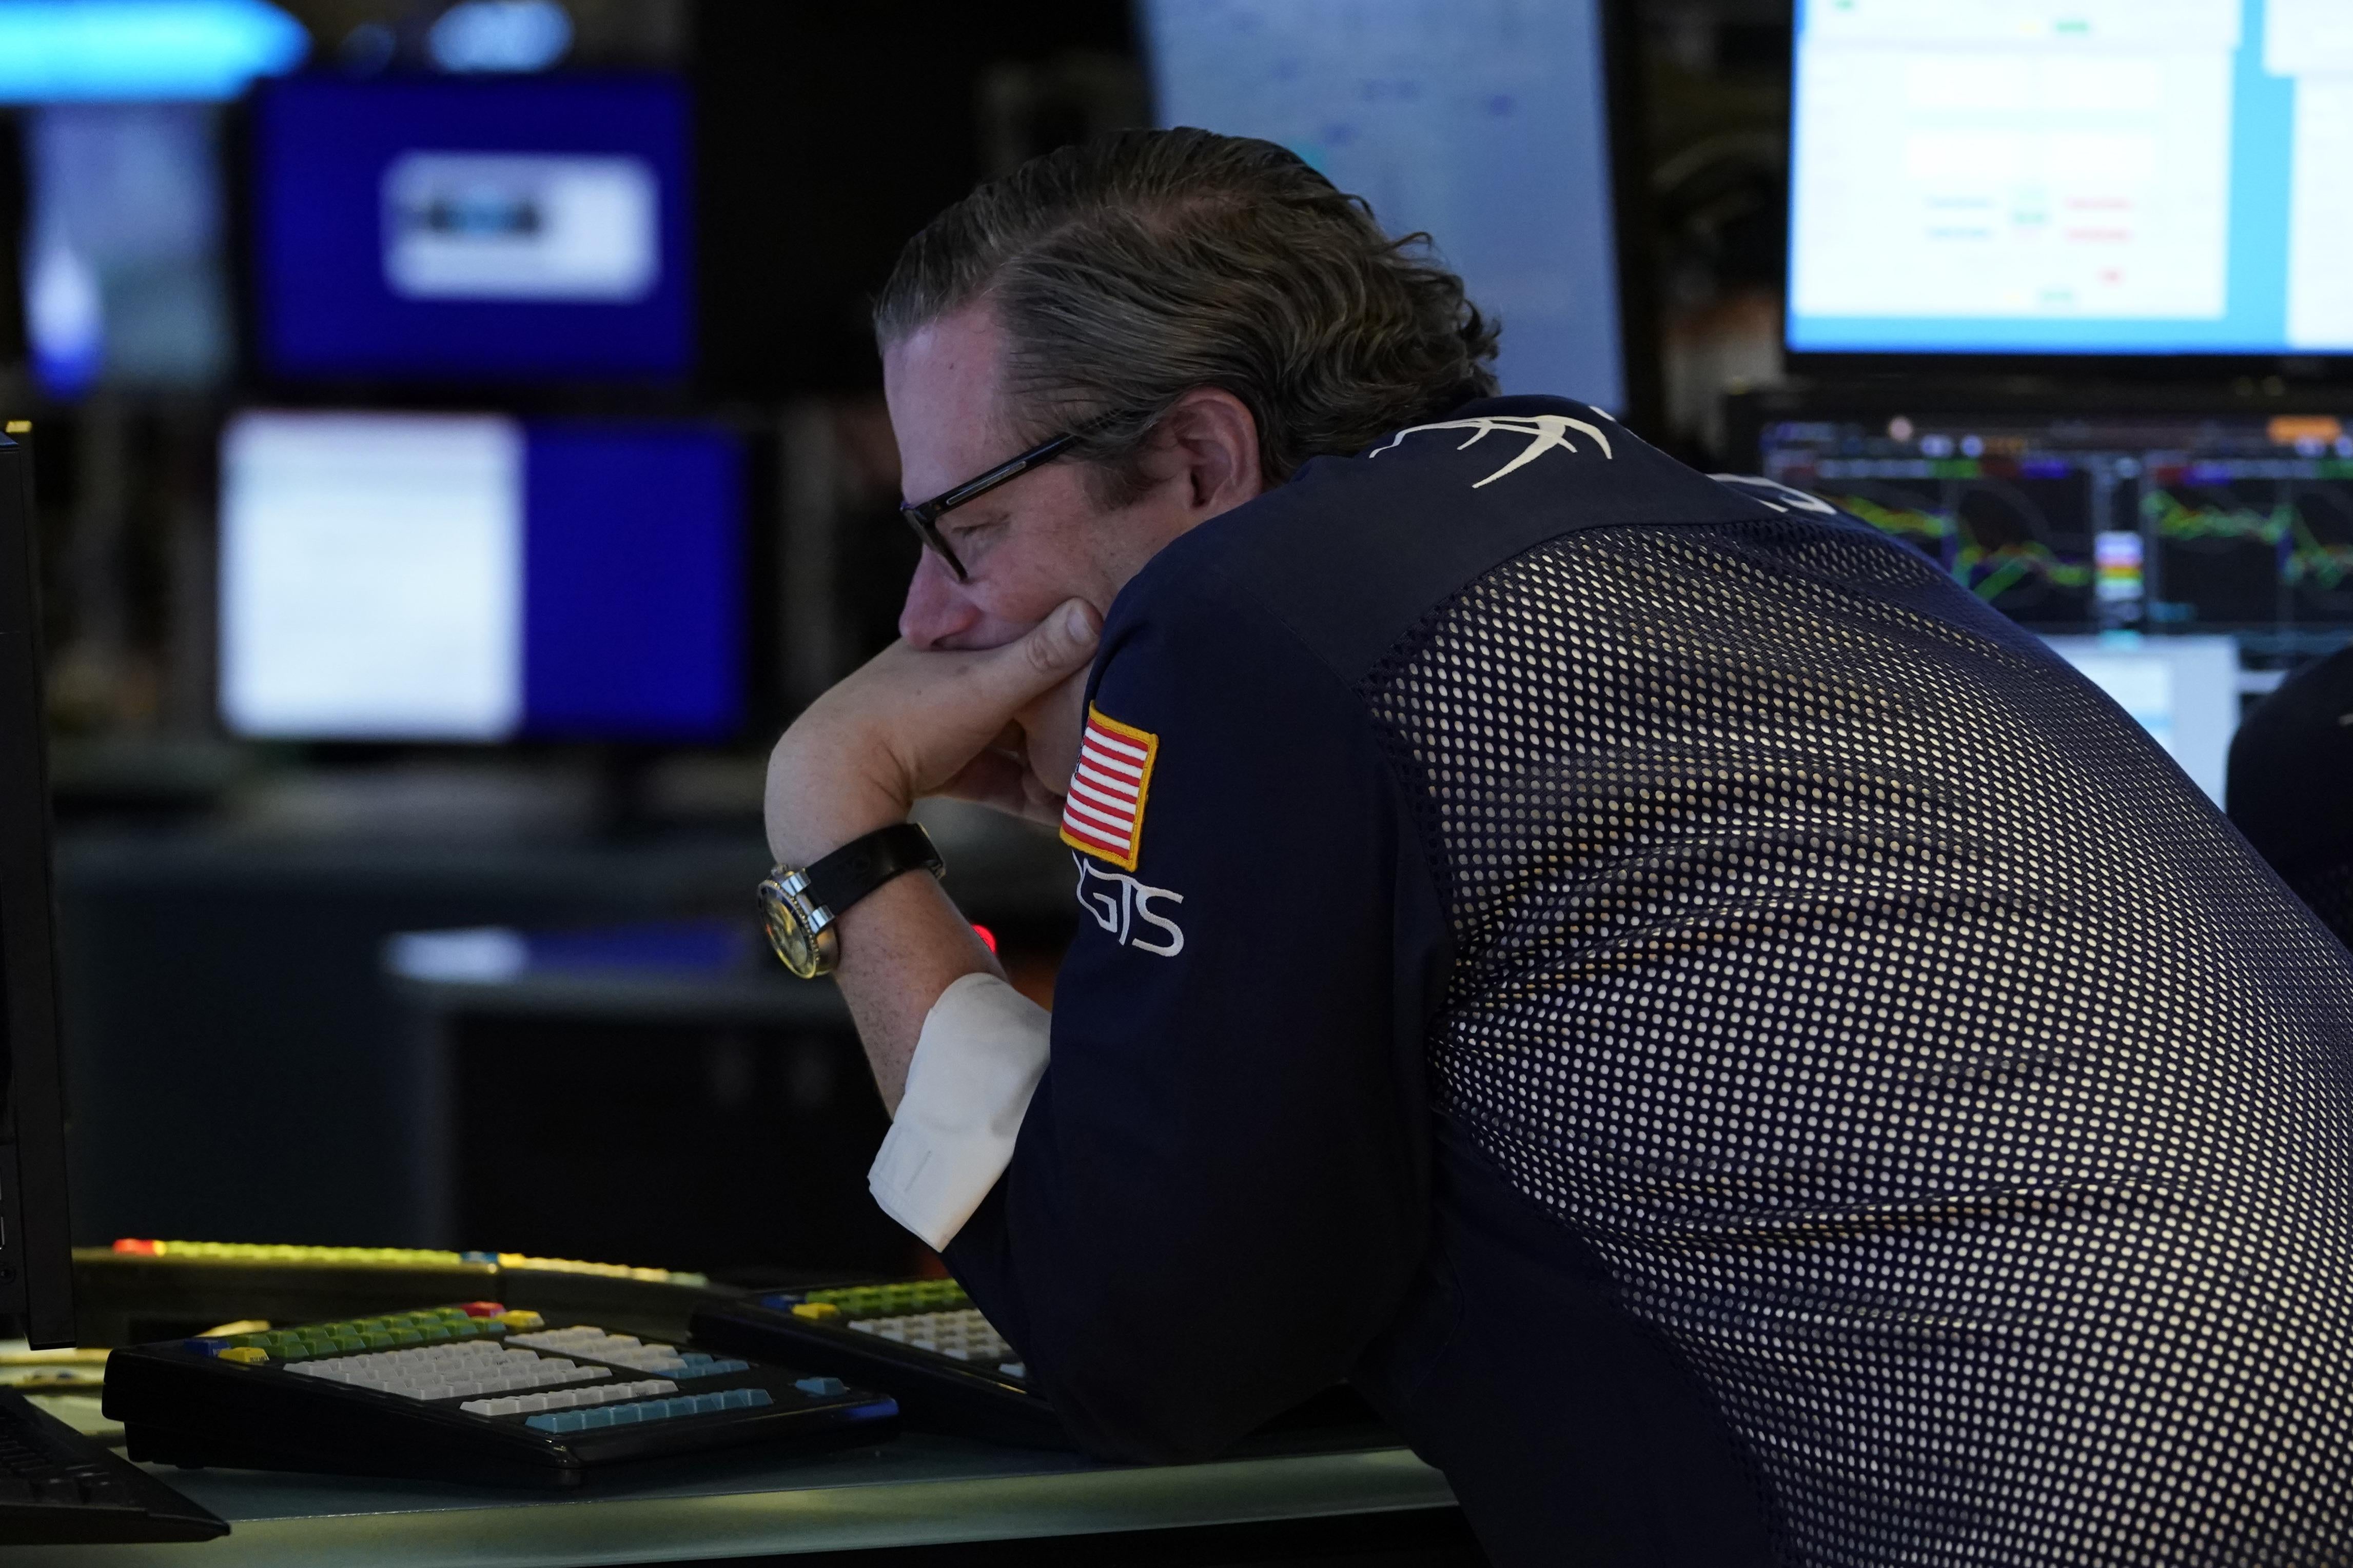 A trader hunches over a keyboard with his hand over his mouth